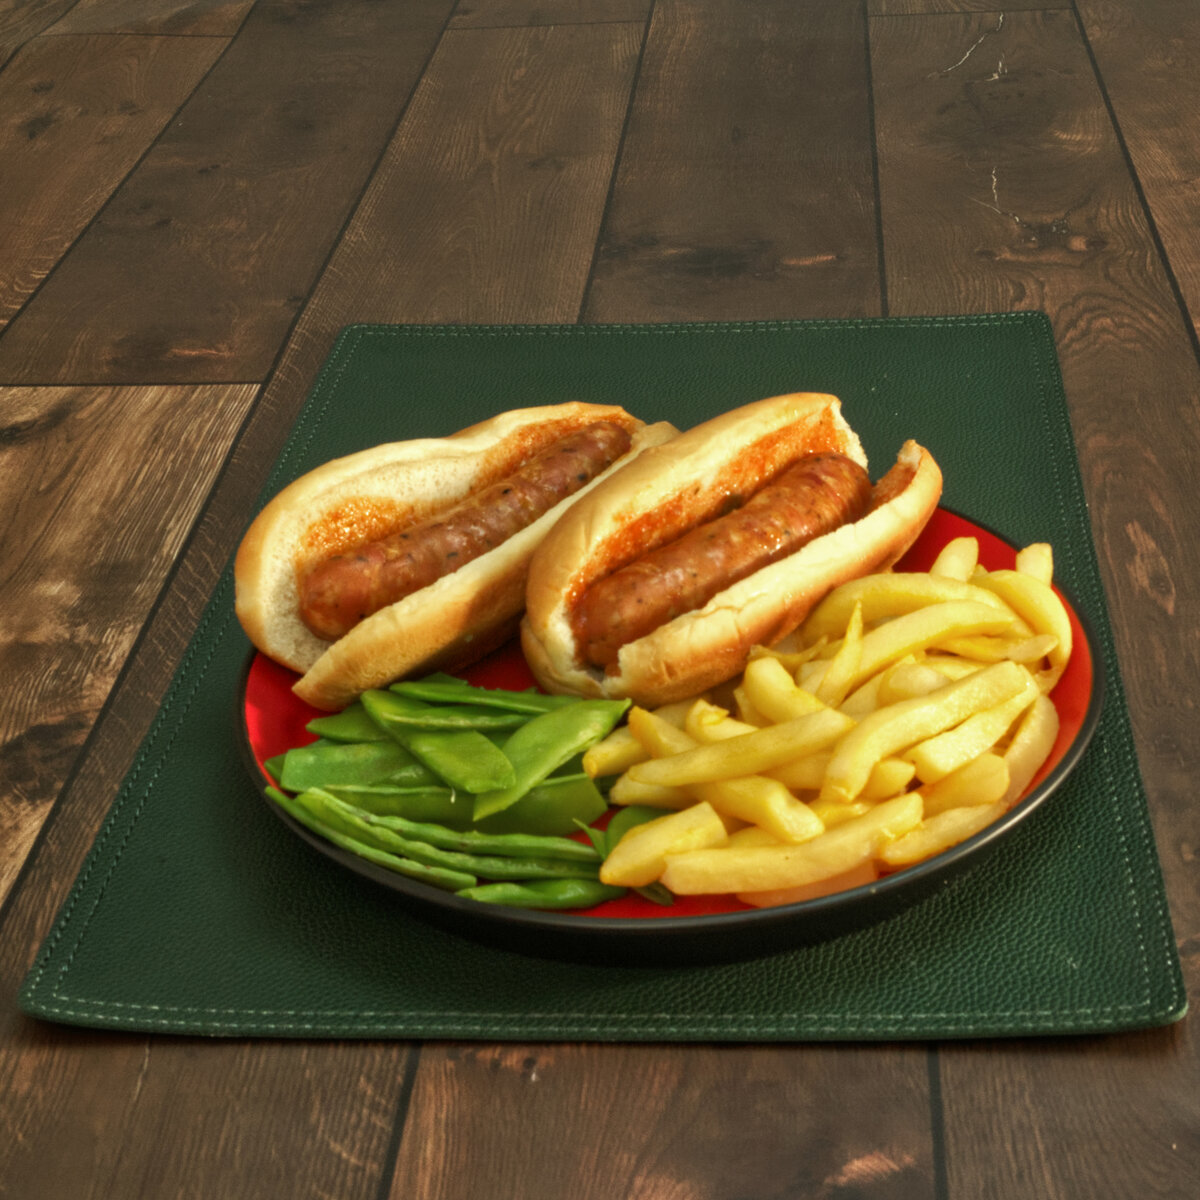 Andouille Sandwiches, Snow Peas and French Fries